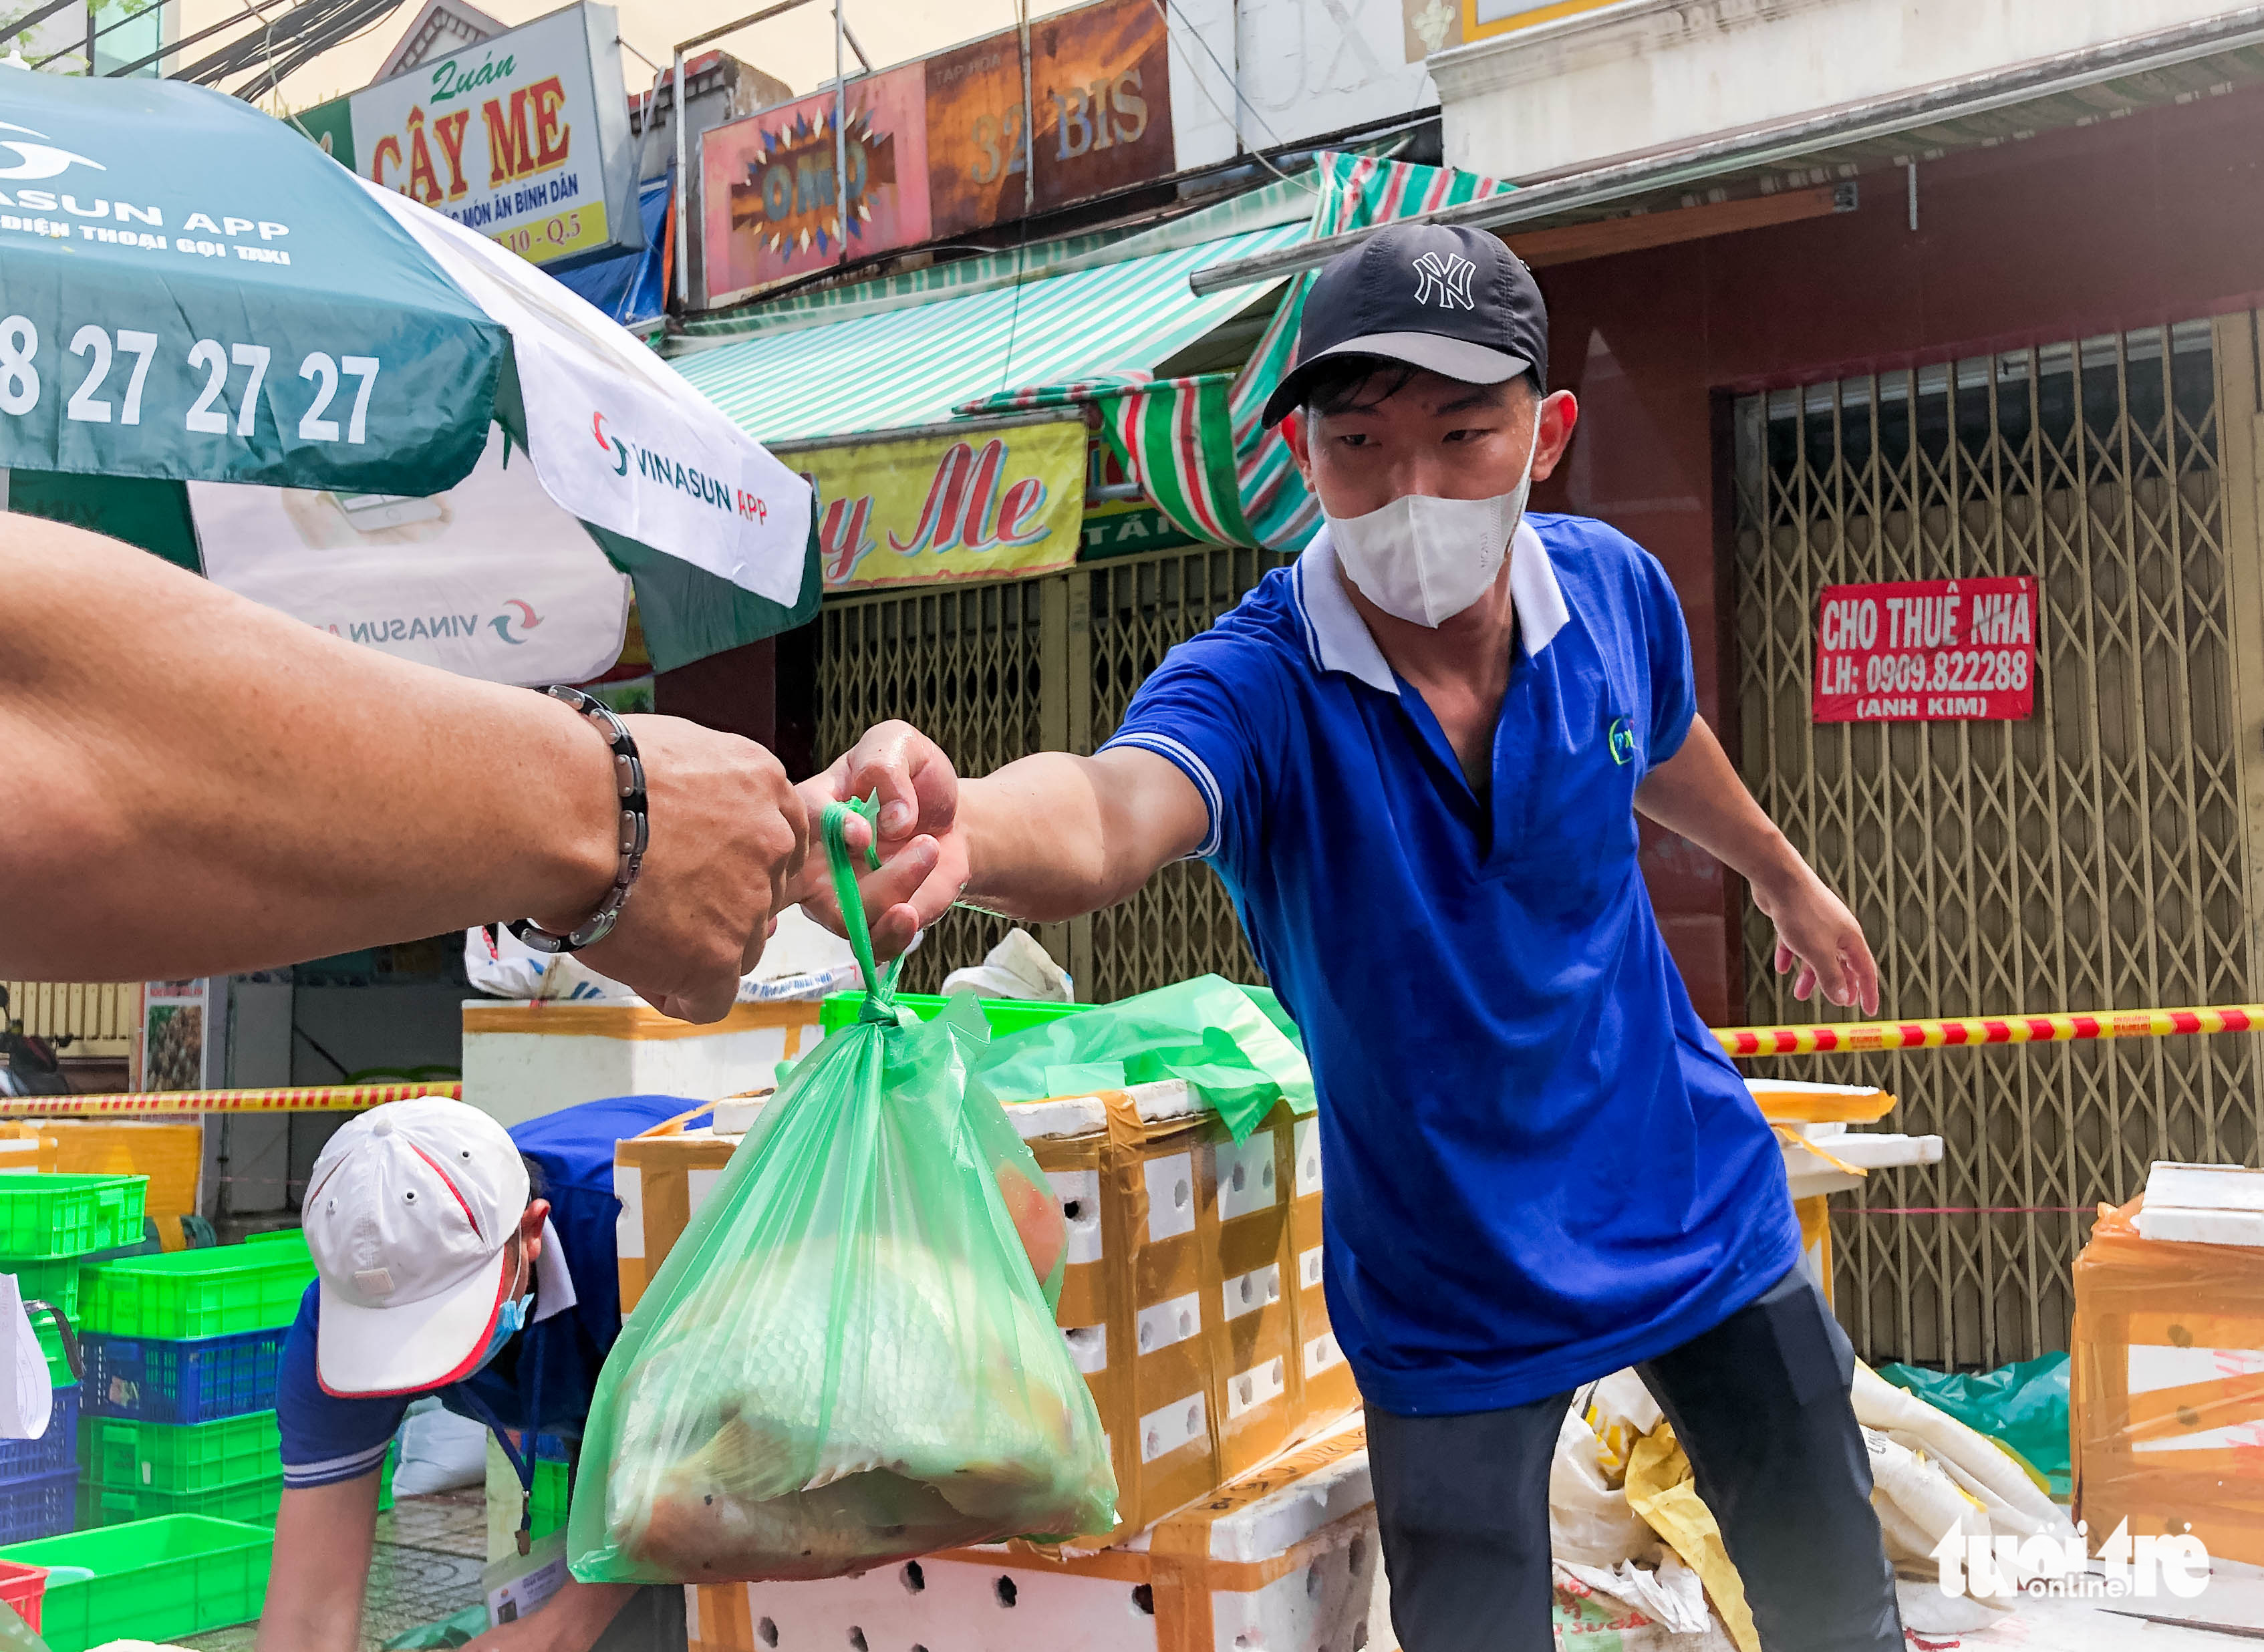 Merchants at the market must be fully vaccinated against COVID-19. Photo: Chau Tuan / Tuoi Tre